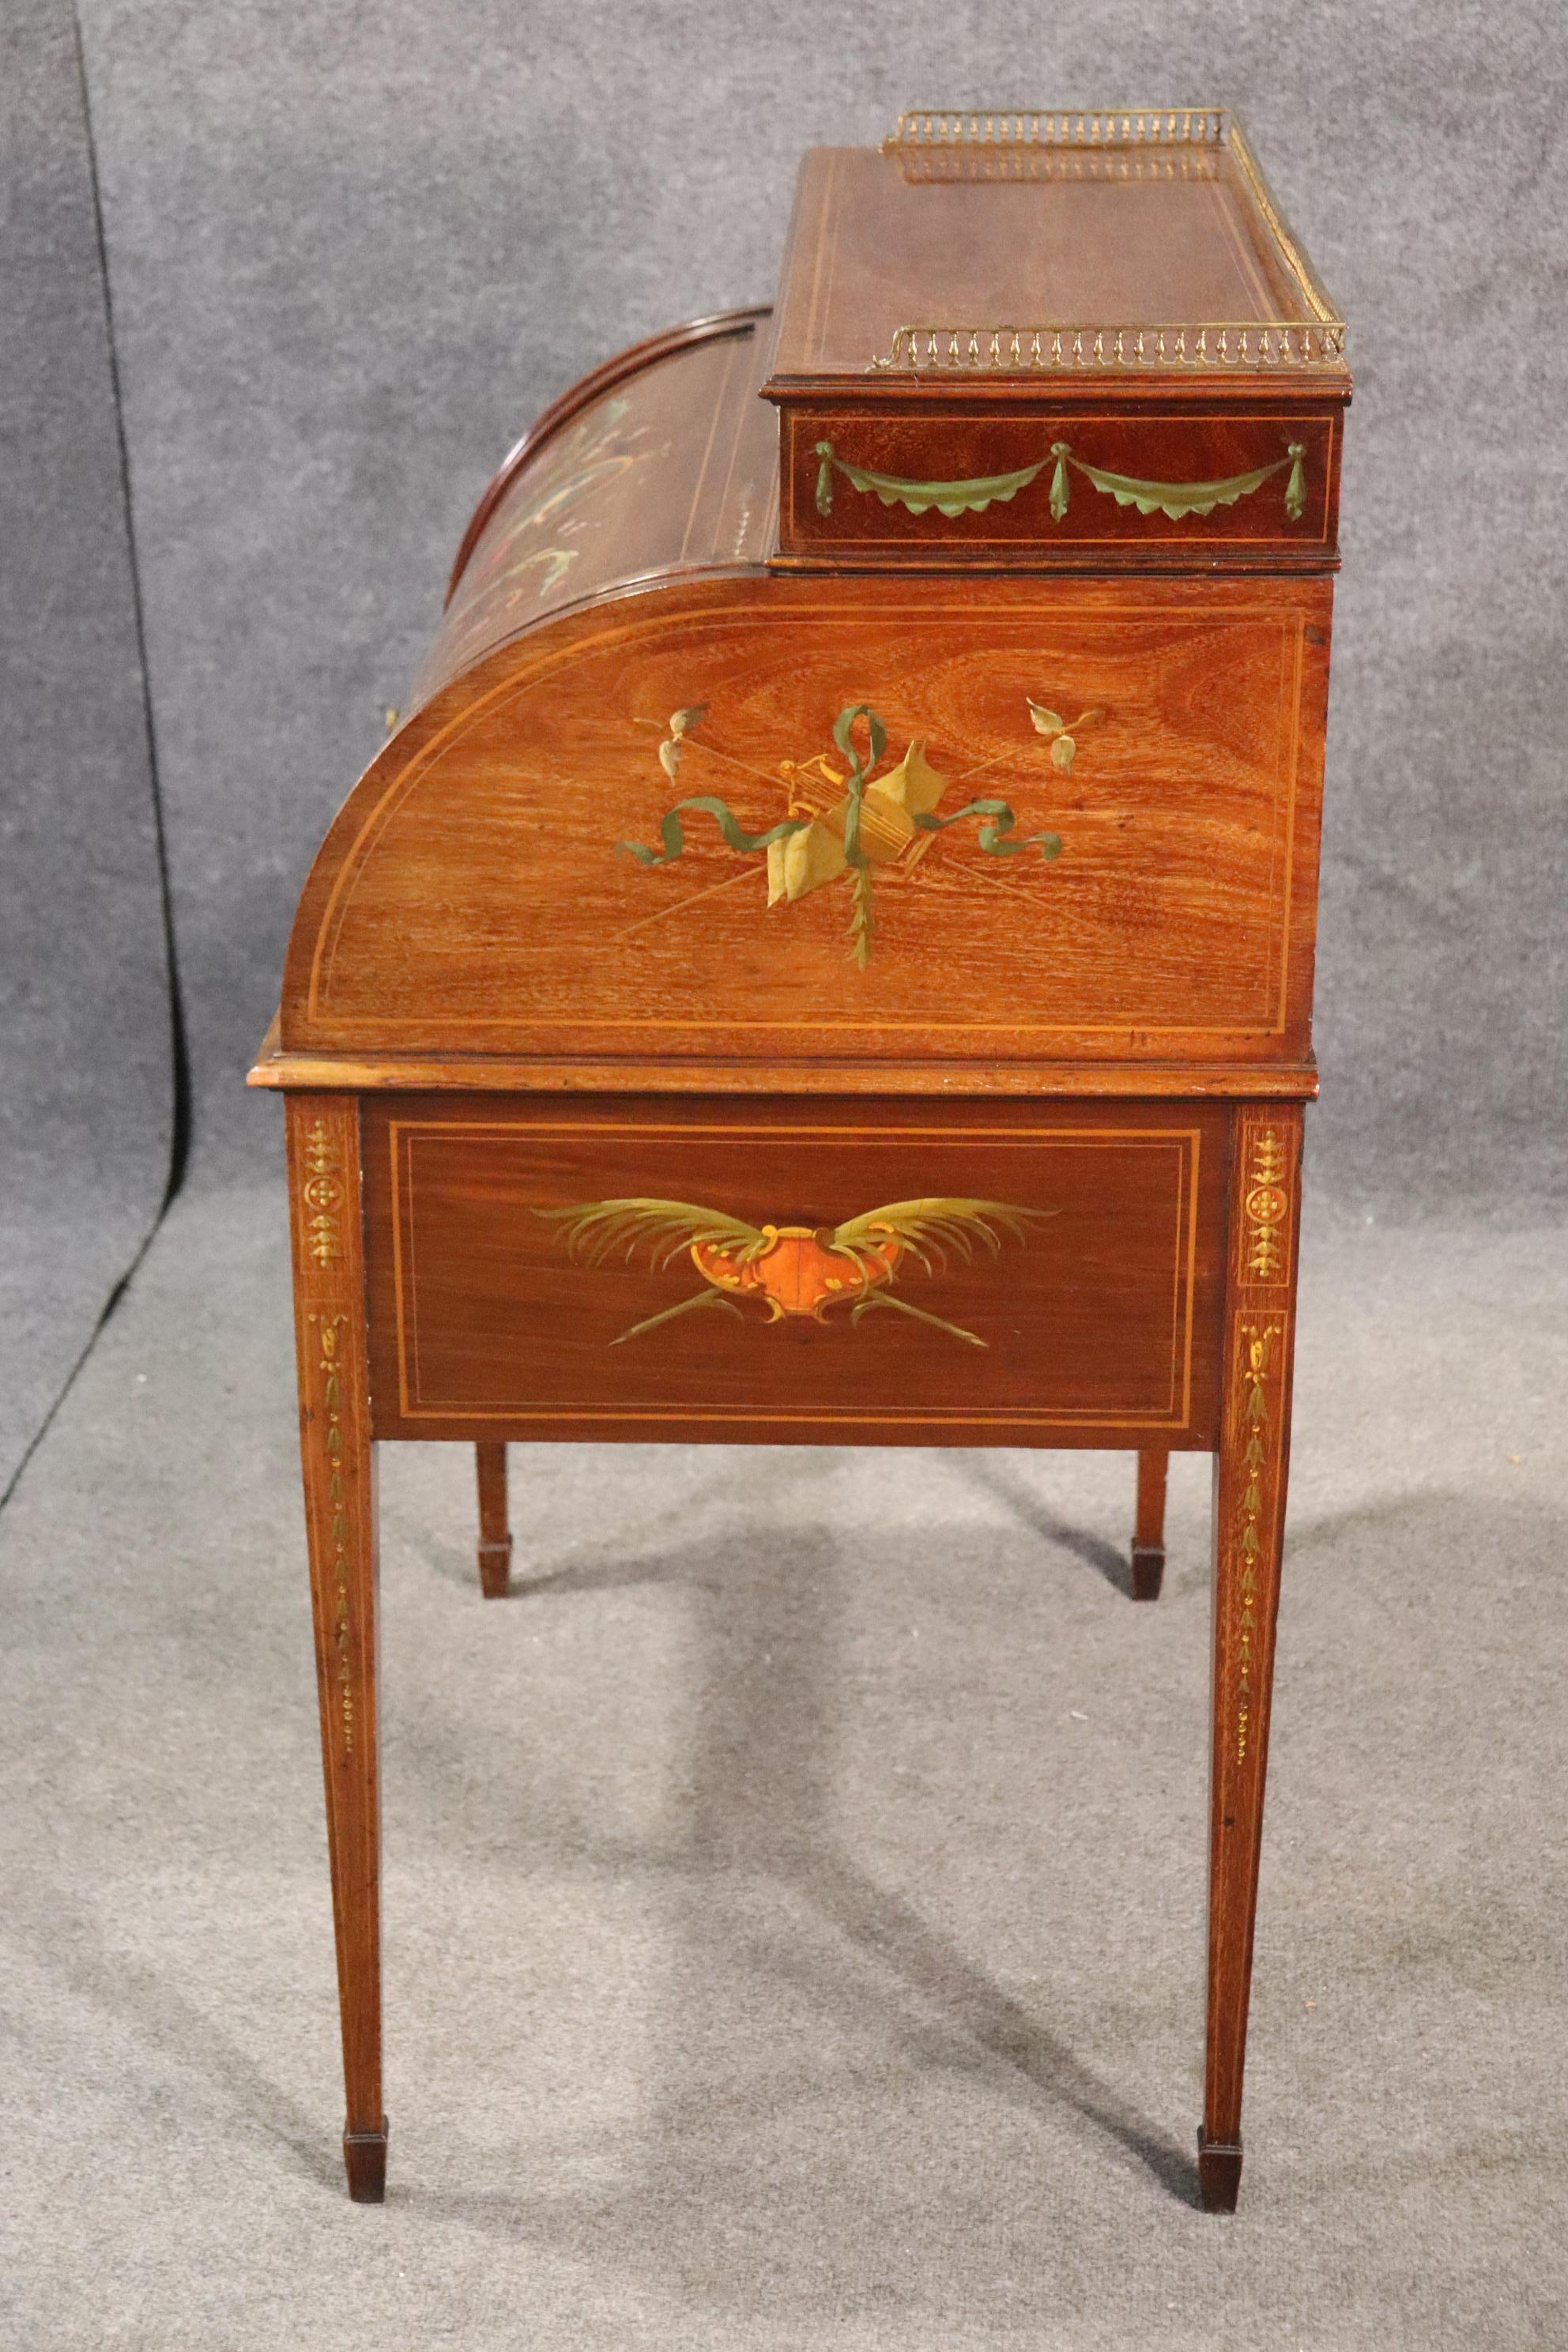 Early 20th Century English Adams Paint Decorated Solid Mahogany Cylinder Desk with Leather Top